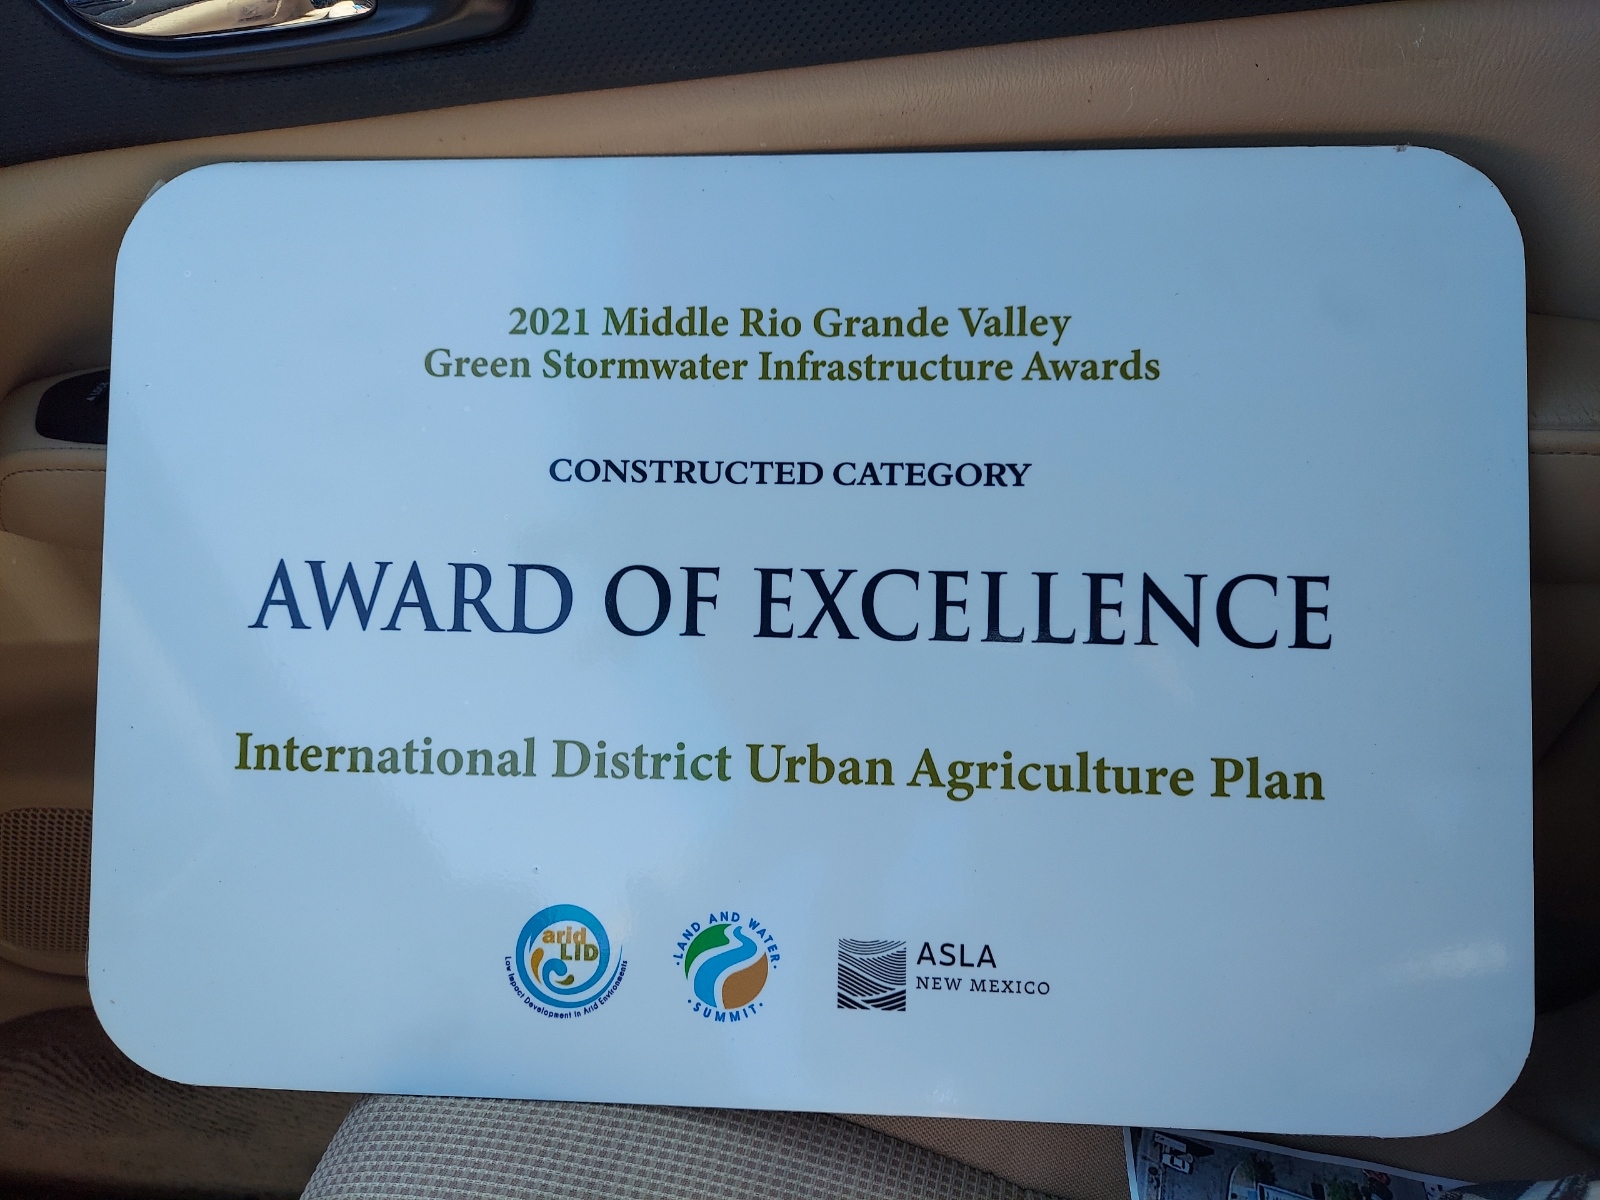 Award of Excellence for Green Stormwater Infrastructure